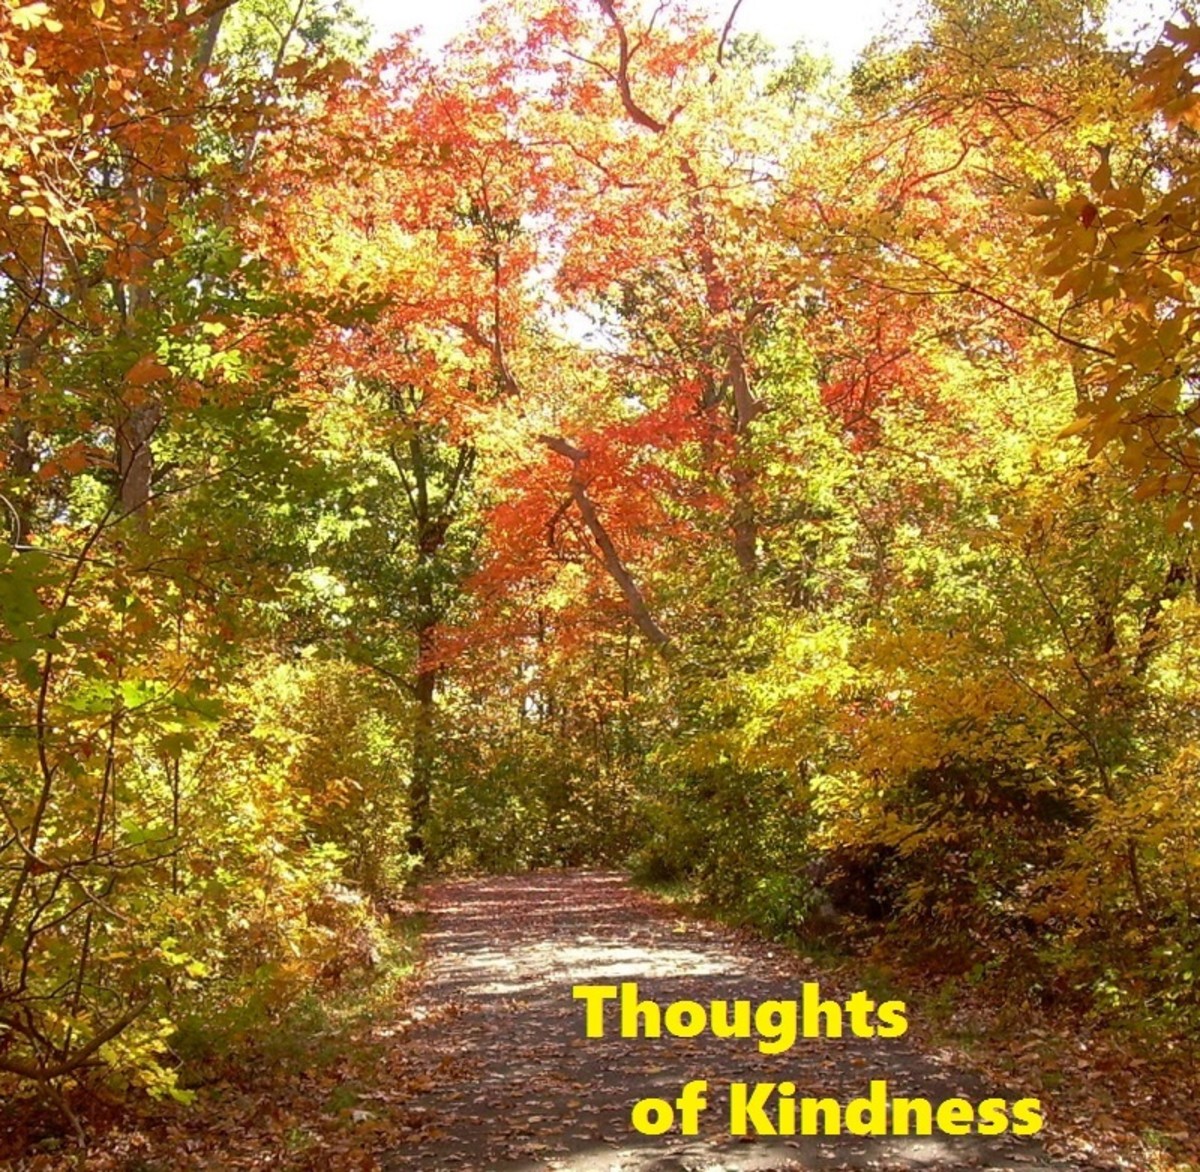 Thoughts of Kindness